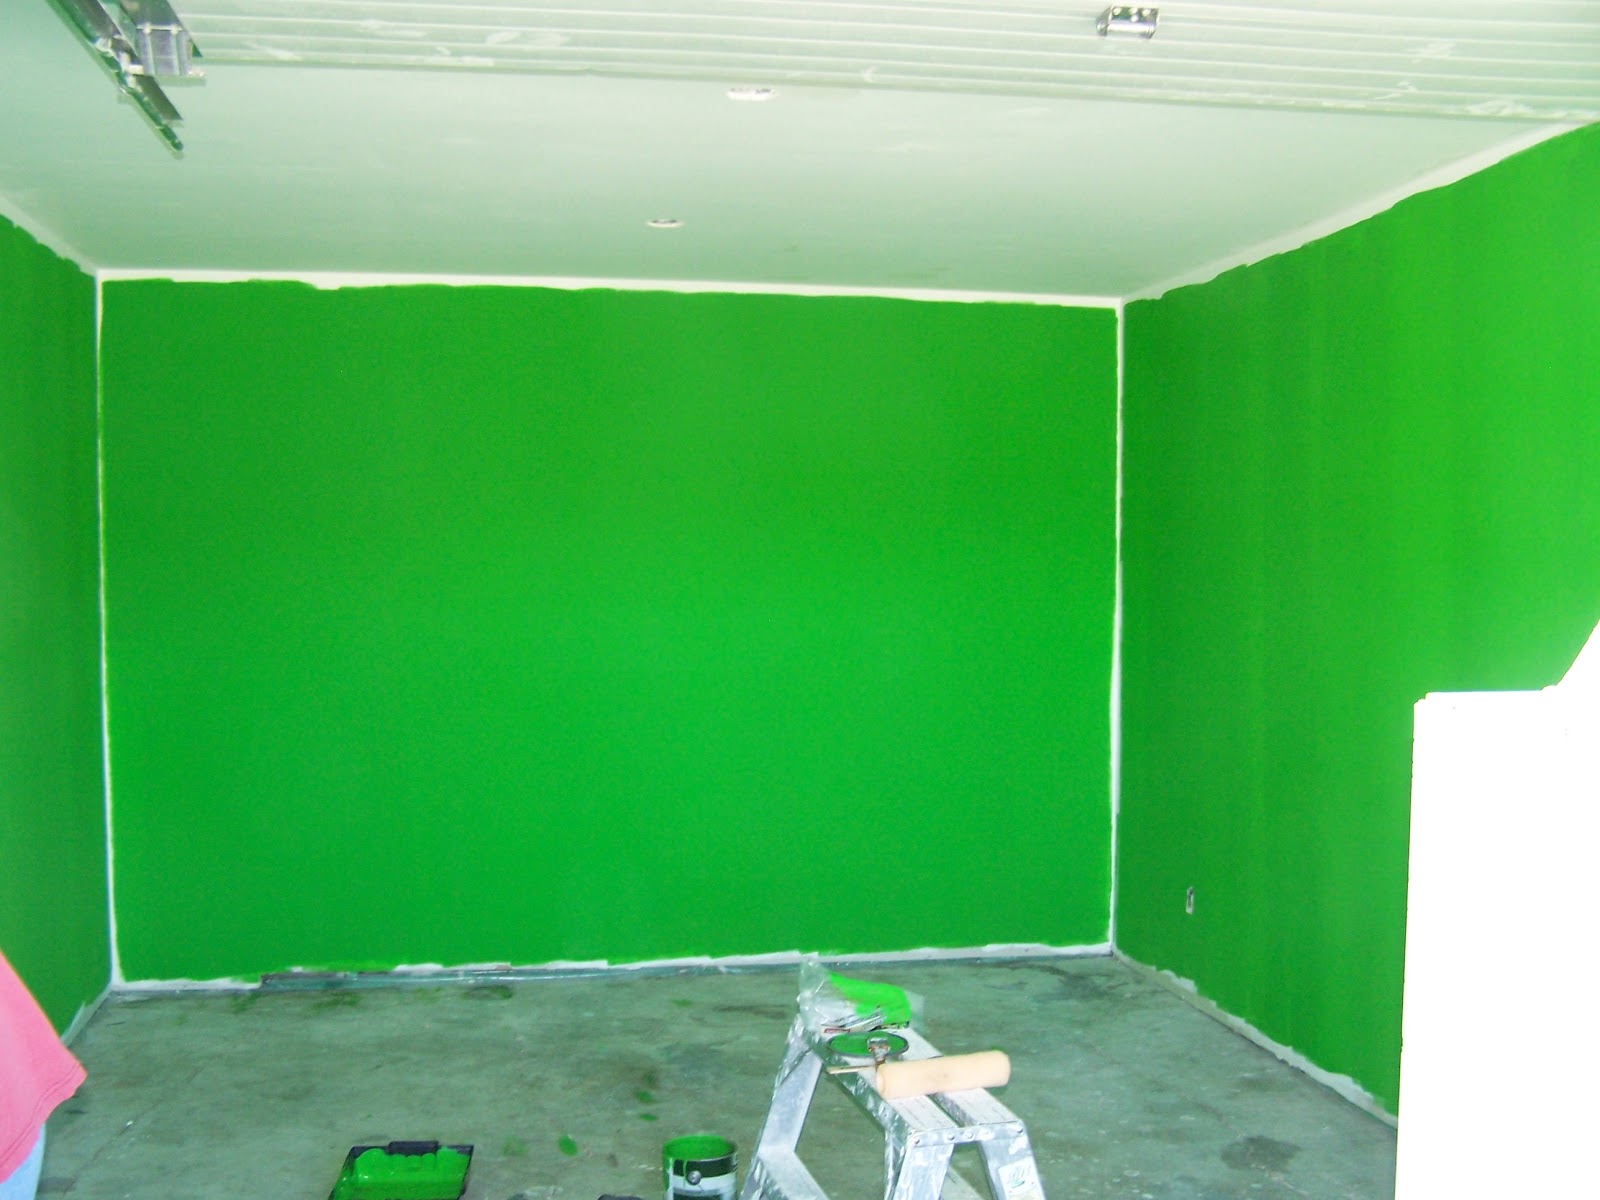 Brothers of War: Green Screen Room